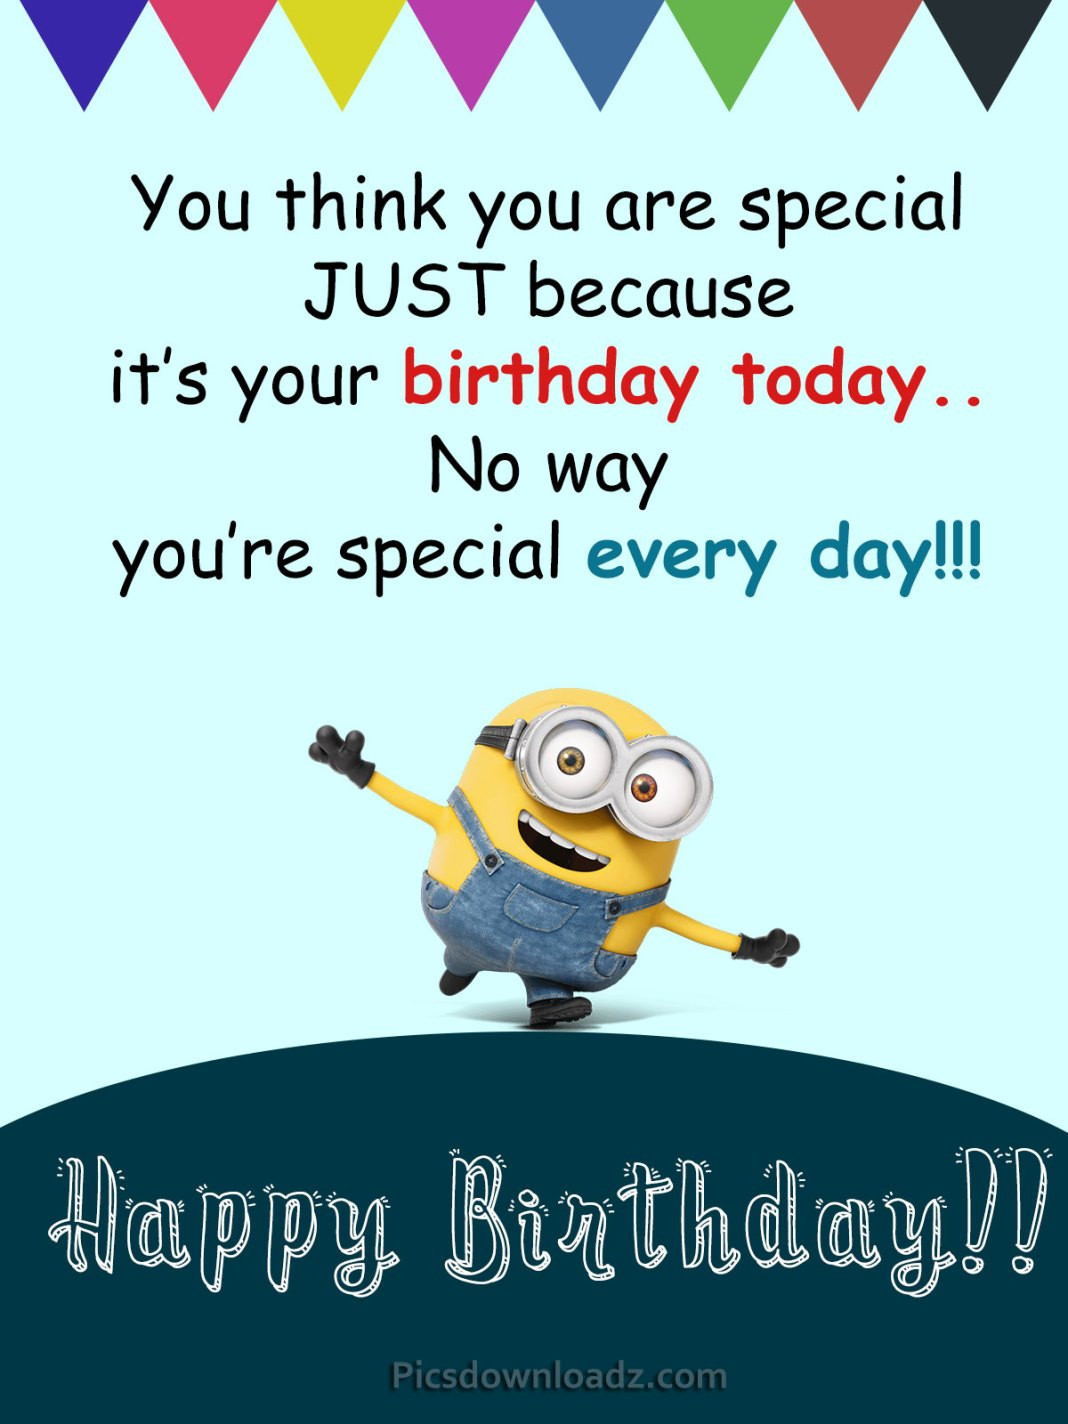 Happy Birthday Quotes For Friends Funny
 Funny Happy Birthday Wishes for Best Friend Happy